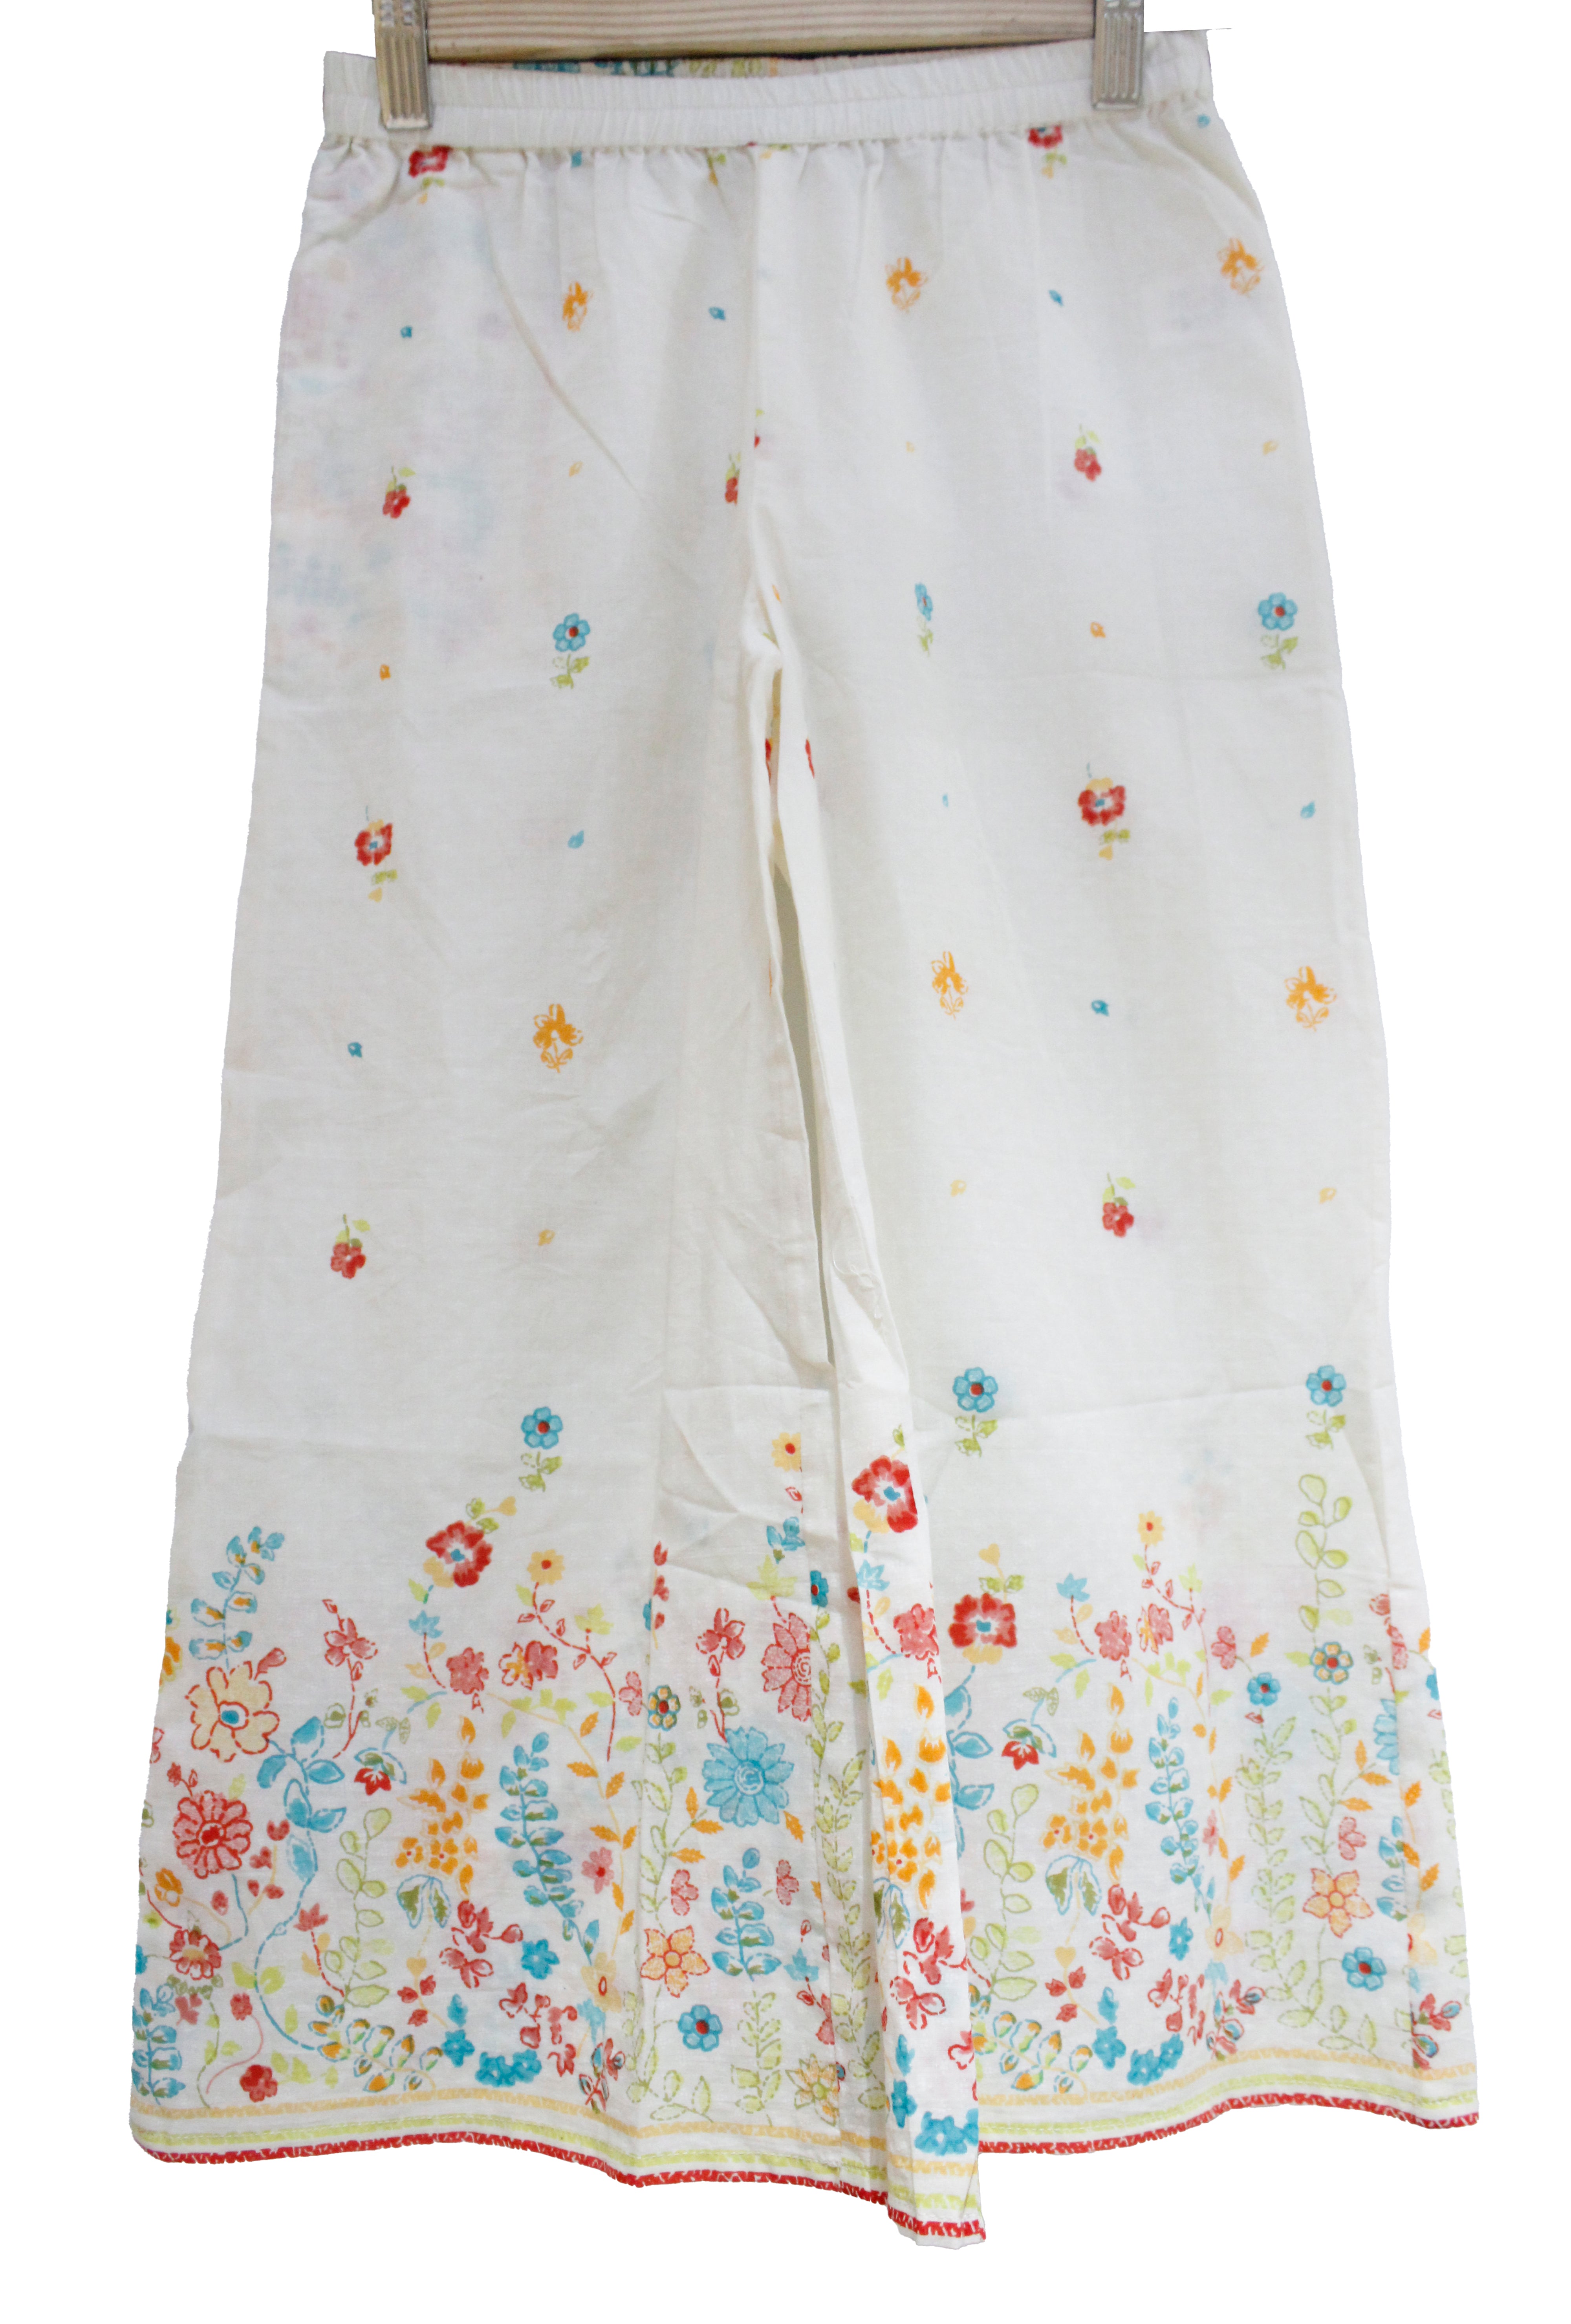 Chic Creamy Delight: Kids' Kurti Set with Dupatta, Pant, Neck Embroidery, and Floral Print